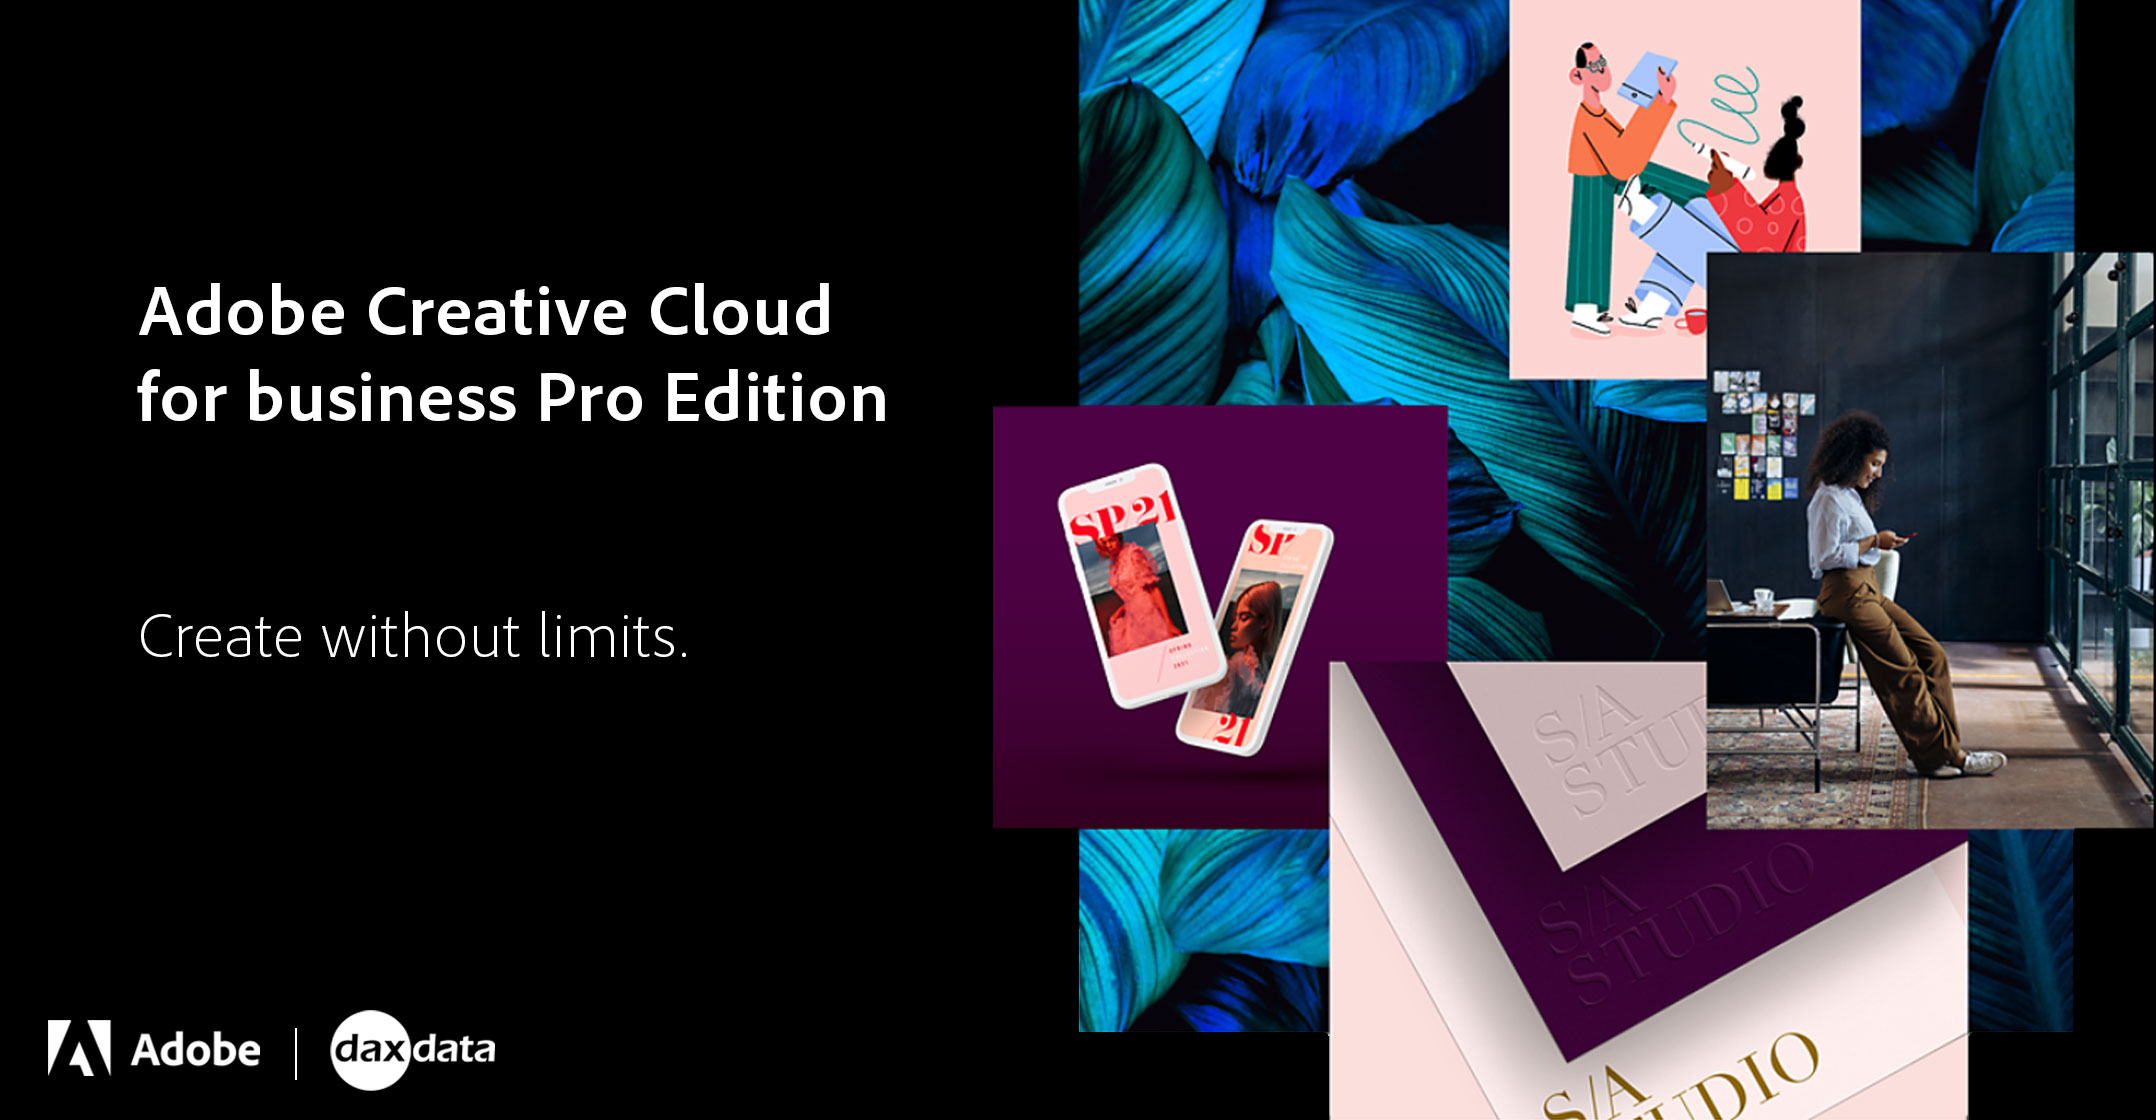 Why creatives are calling Adobe Creative Cloud Pro Edition a 'game changer'  - TechCentral